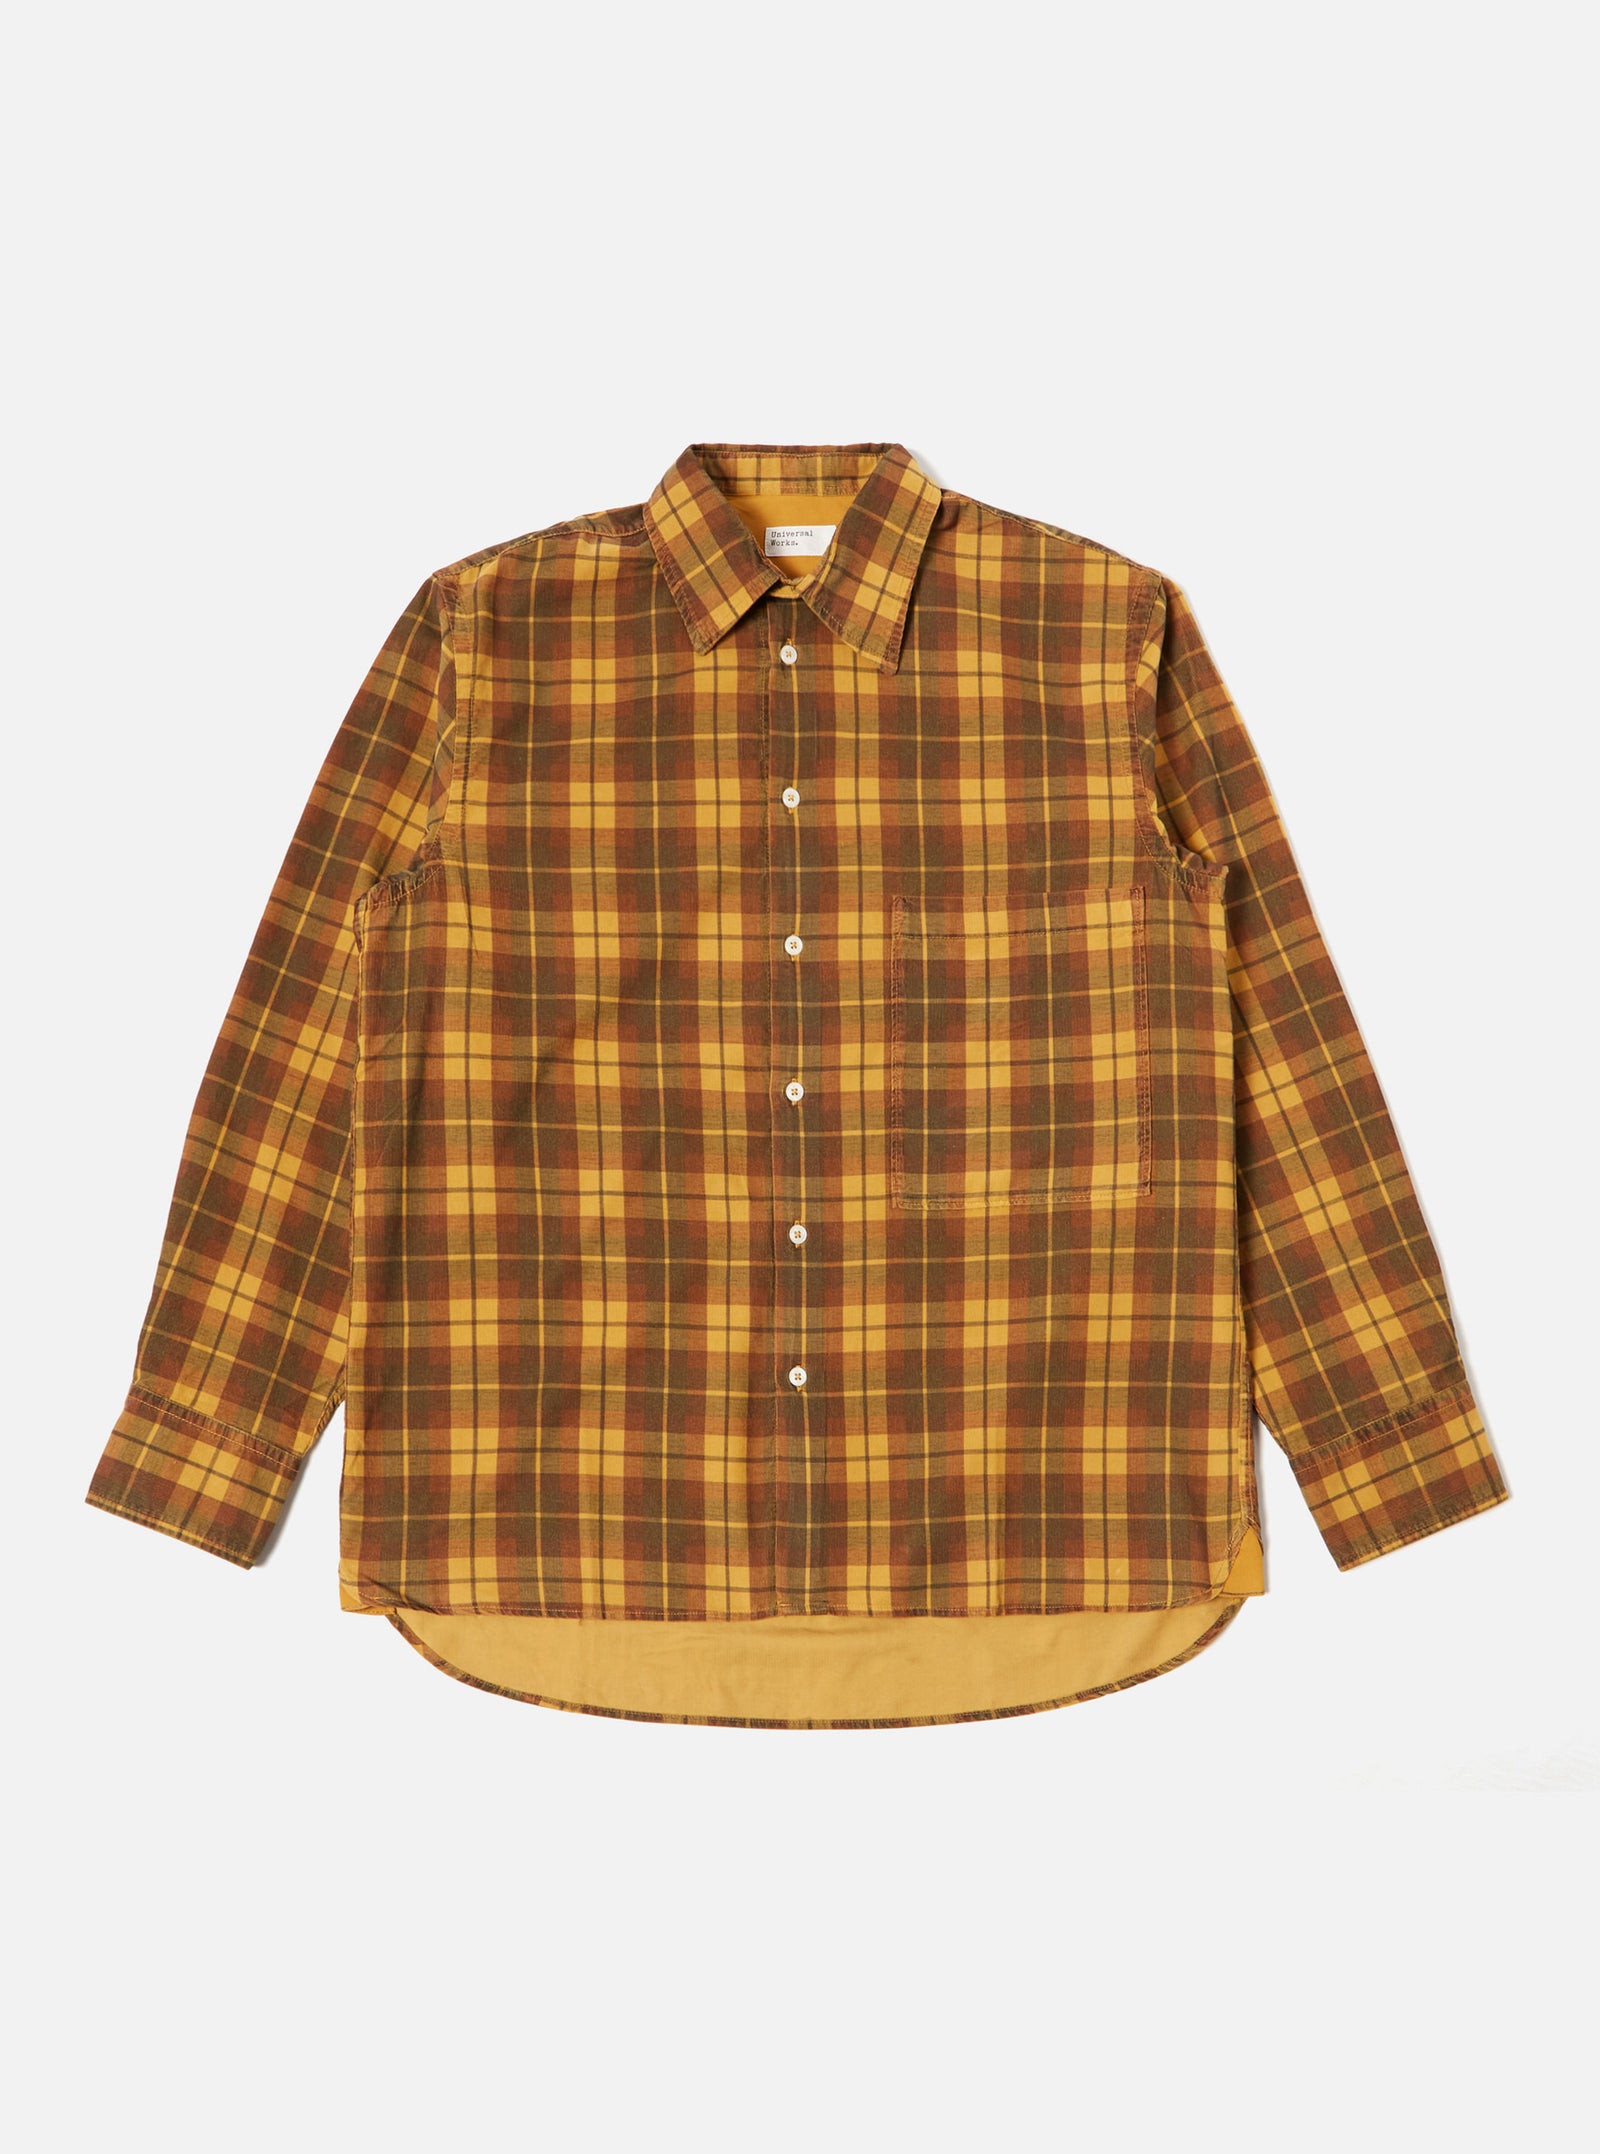 Universal Works Square Pocket Shirt in Mustard Check Cord